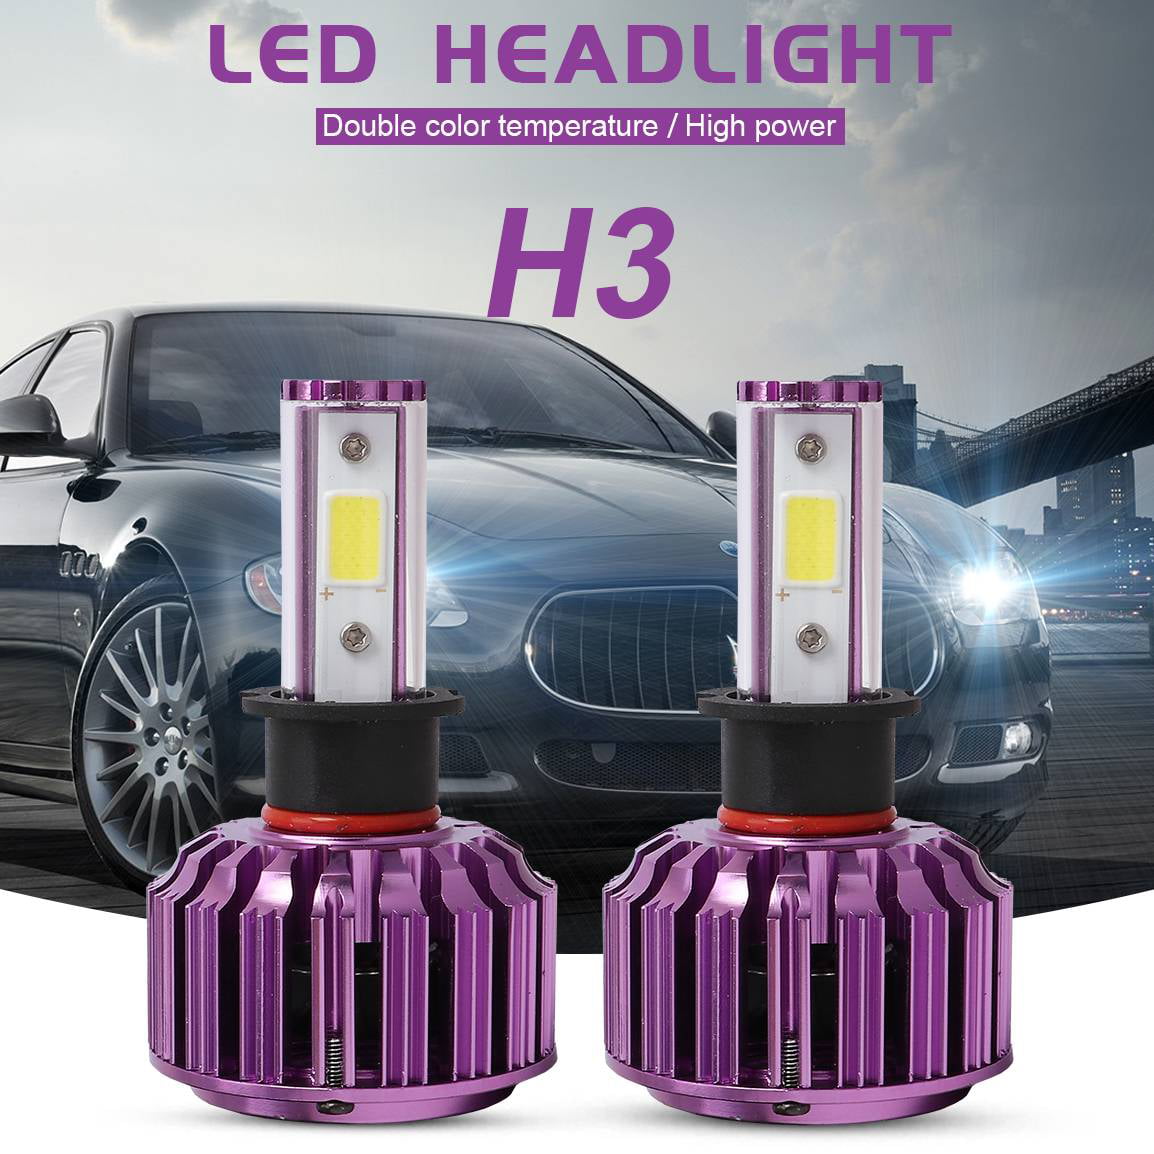 2x New Boxed 30w/60w High Power LED Fog/Driving Light Replacement Bulbs in H3 H8 